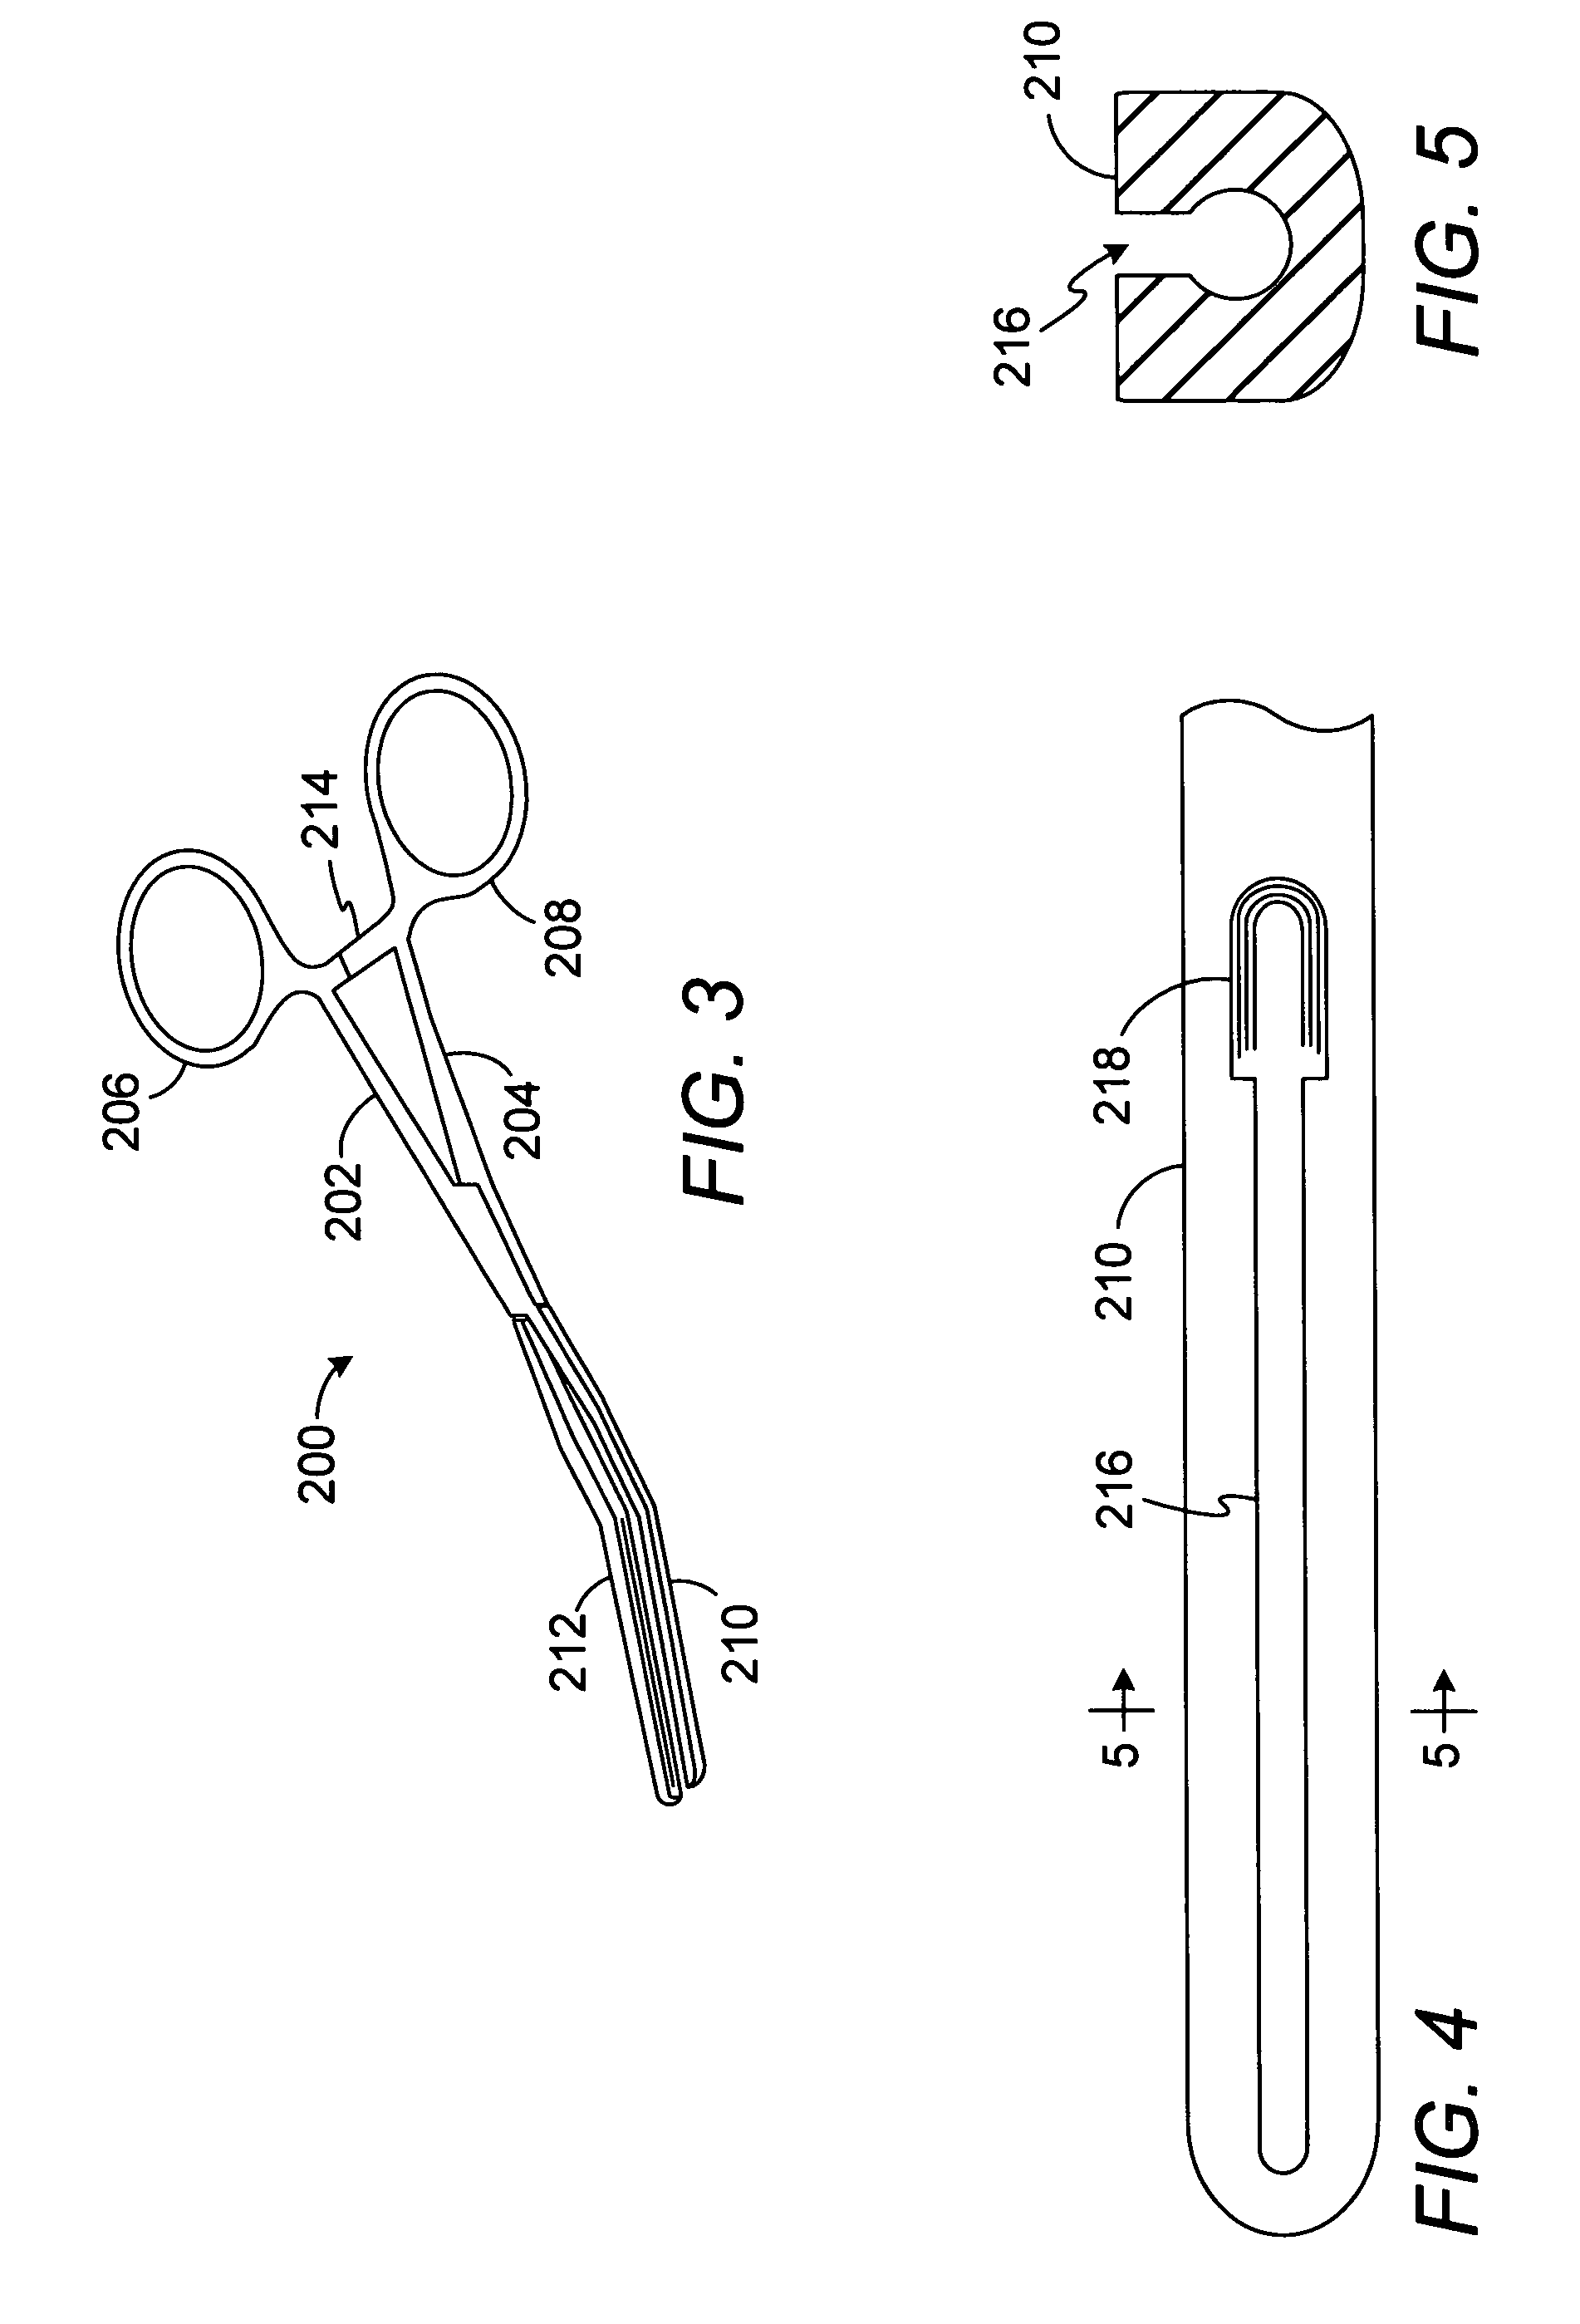 Surgical clip applicator and apparatus including the same